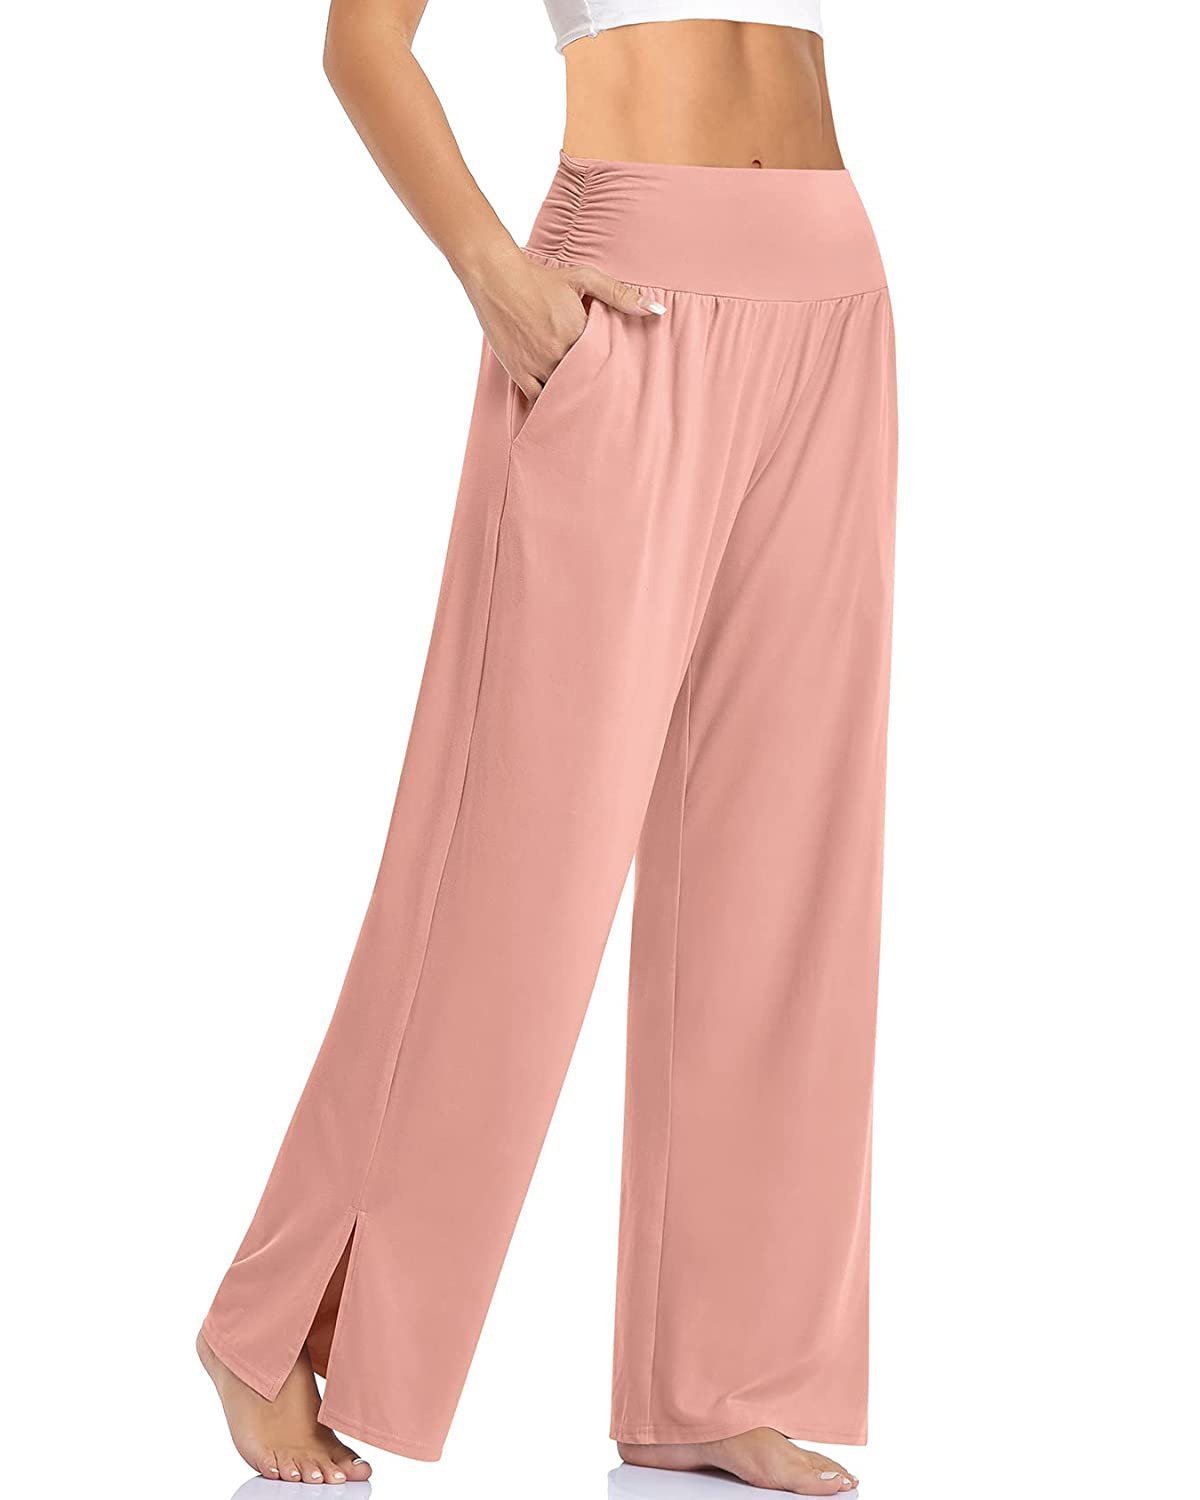 ✨ New Season Limited Time 50% Off 🔥 Women's Casual Loose Sports Pants